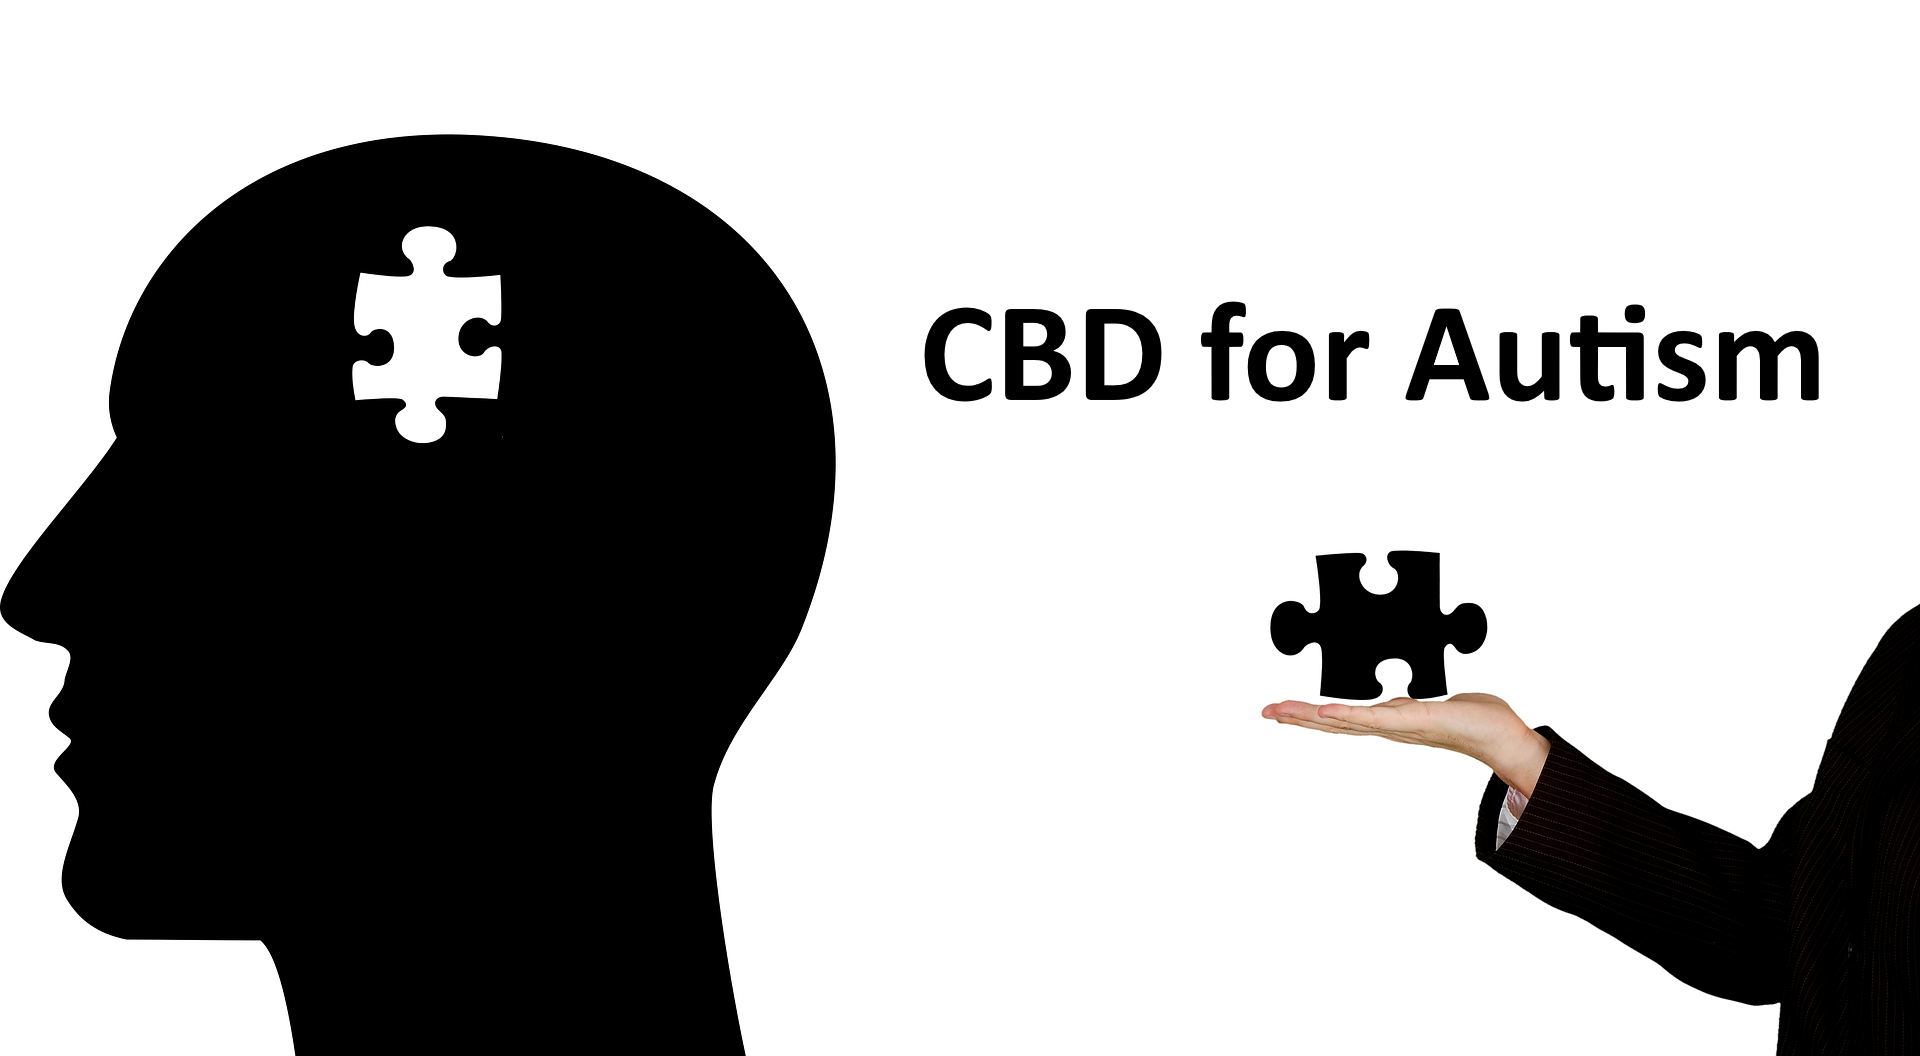 Autism spectrum disorder has a treatment – one that is safe, one that is effective, and one that has been shown many times over to be without any side effects.  CBD is that treatment.